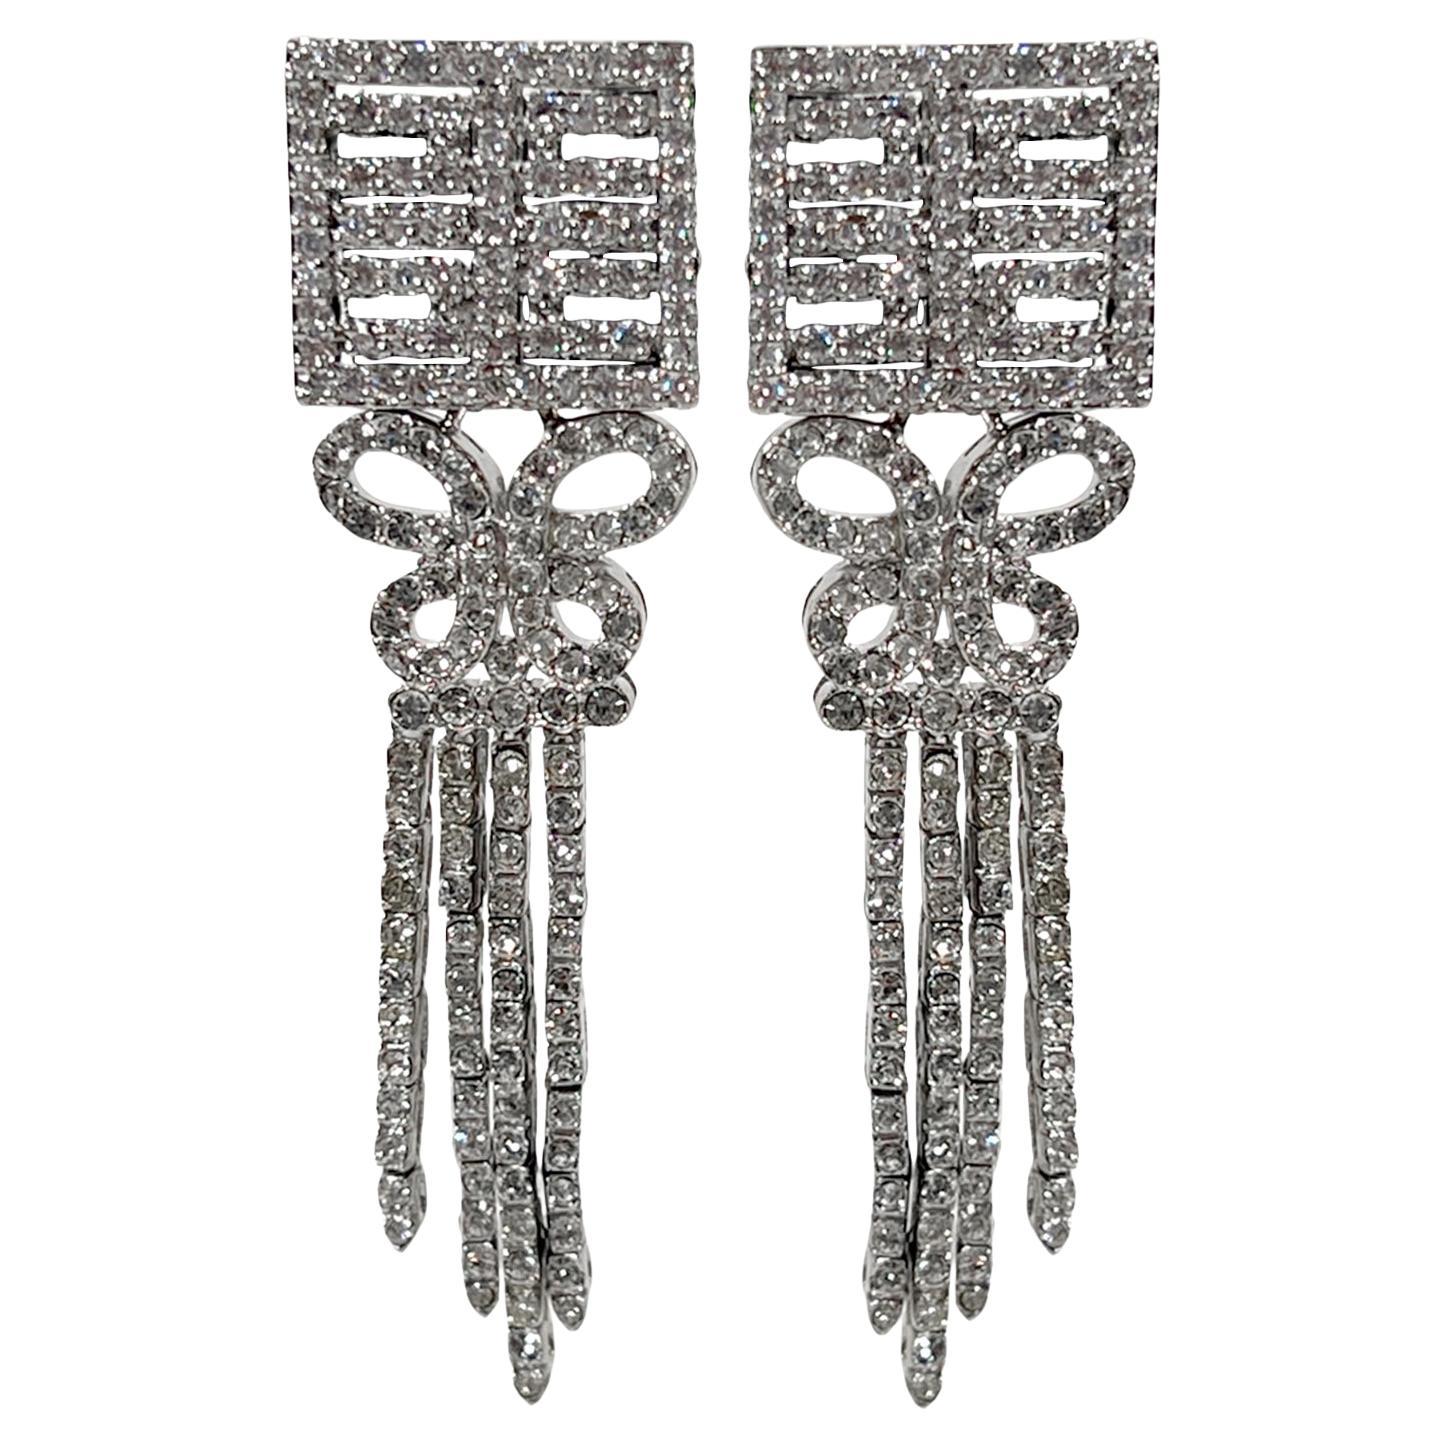 Vintage Art Deco Costume Jewelry Diamanté  Sterling Earrings by Clive Kandel